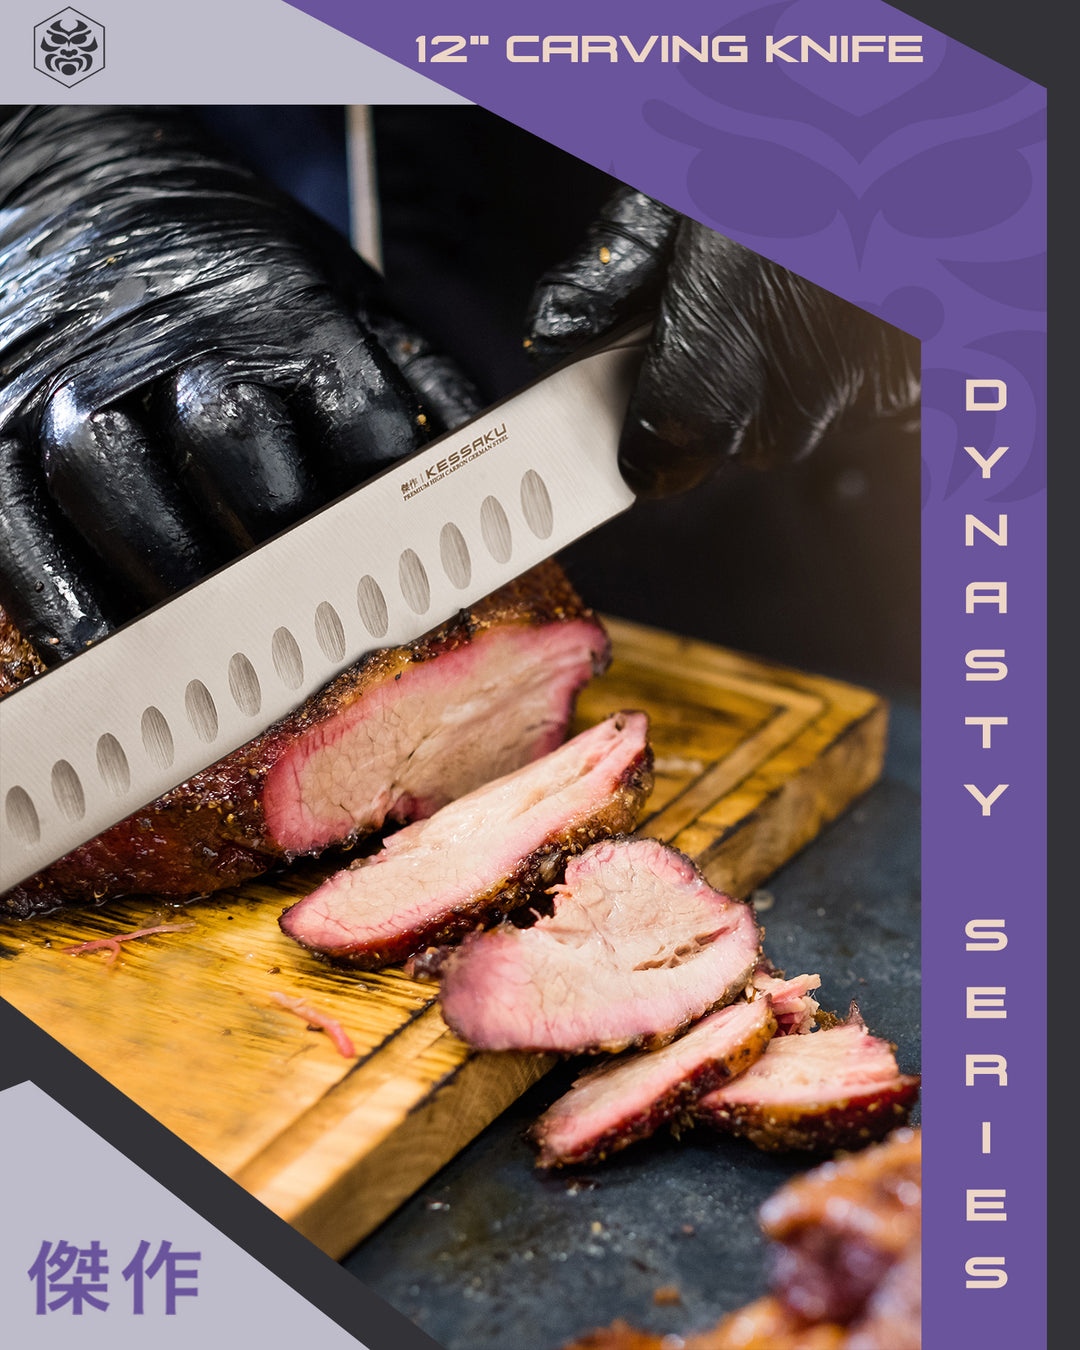 A pitmaster carves brisket with the Dynasty Carving Knife